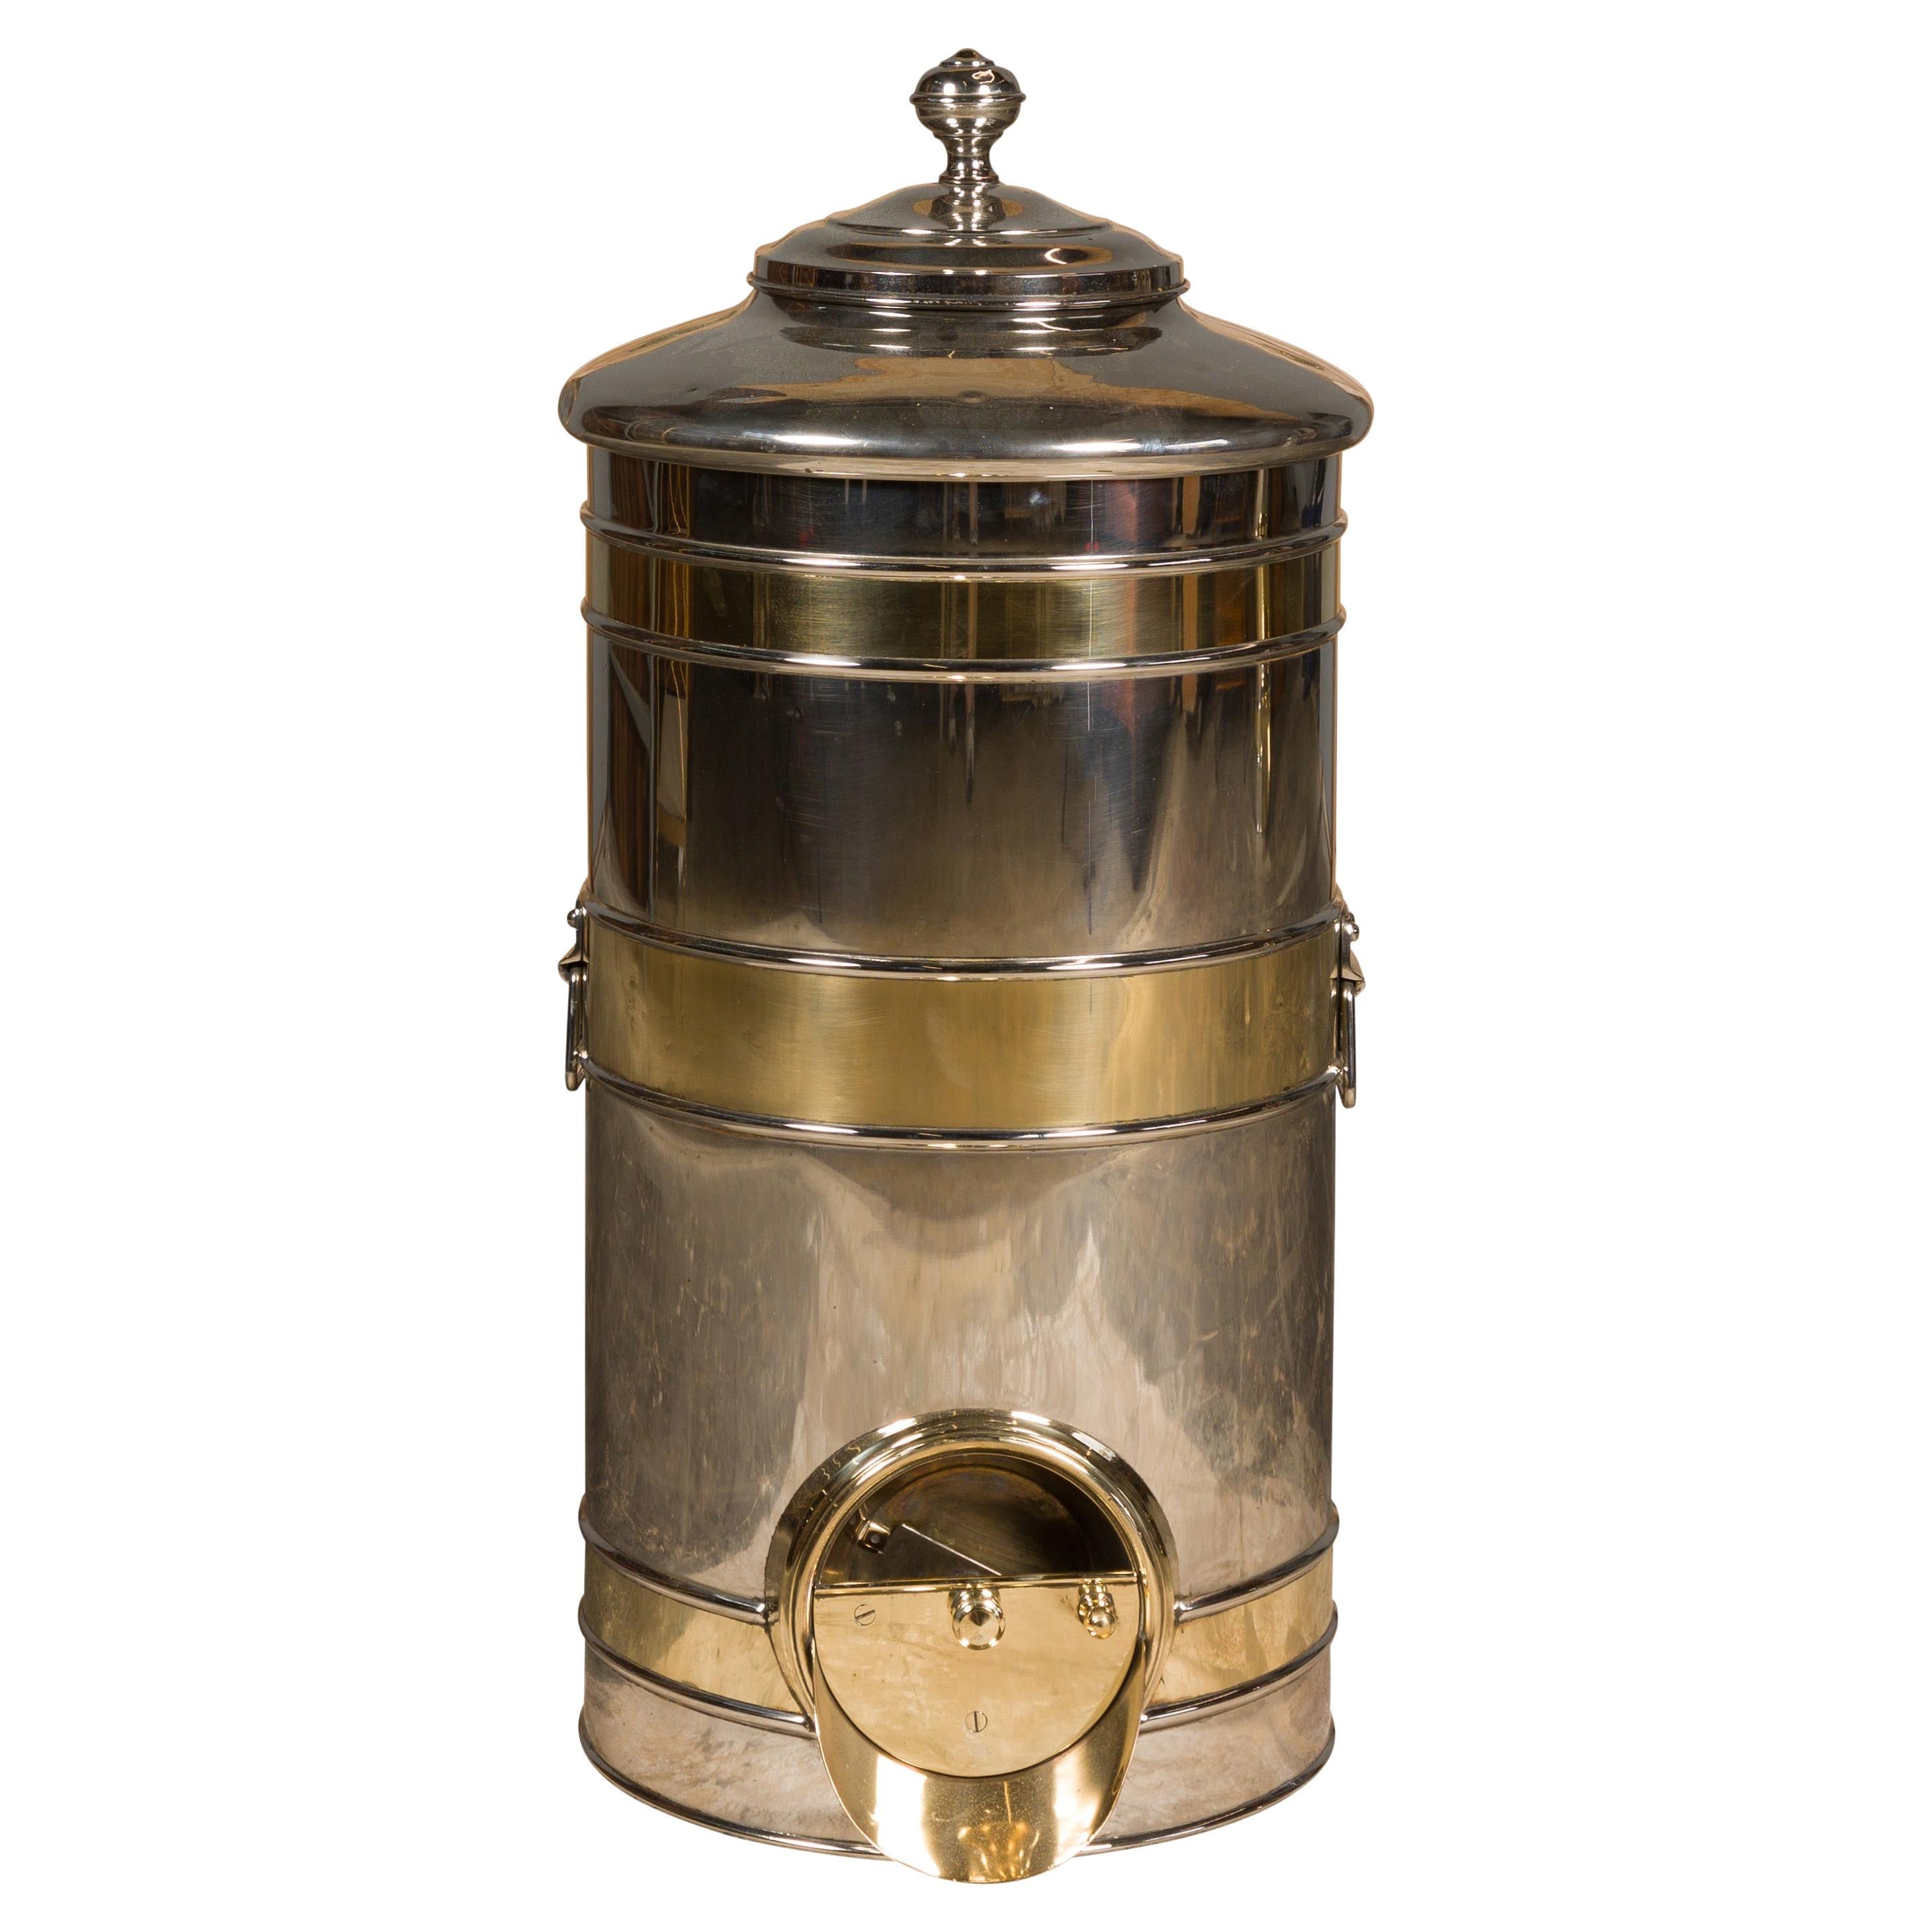 https://a.1stdibscdn.com/turn-of-the-century-french-steel-and-brass-coffee-bean-dispenser-circa-1900-for-sale/f_8367/f_345132321685390002862/f_34513232_1685390003873_bg_processed.jpg